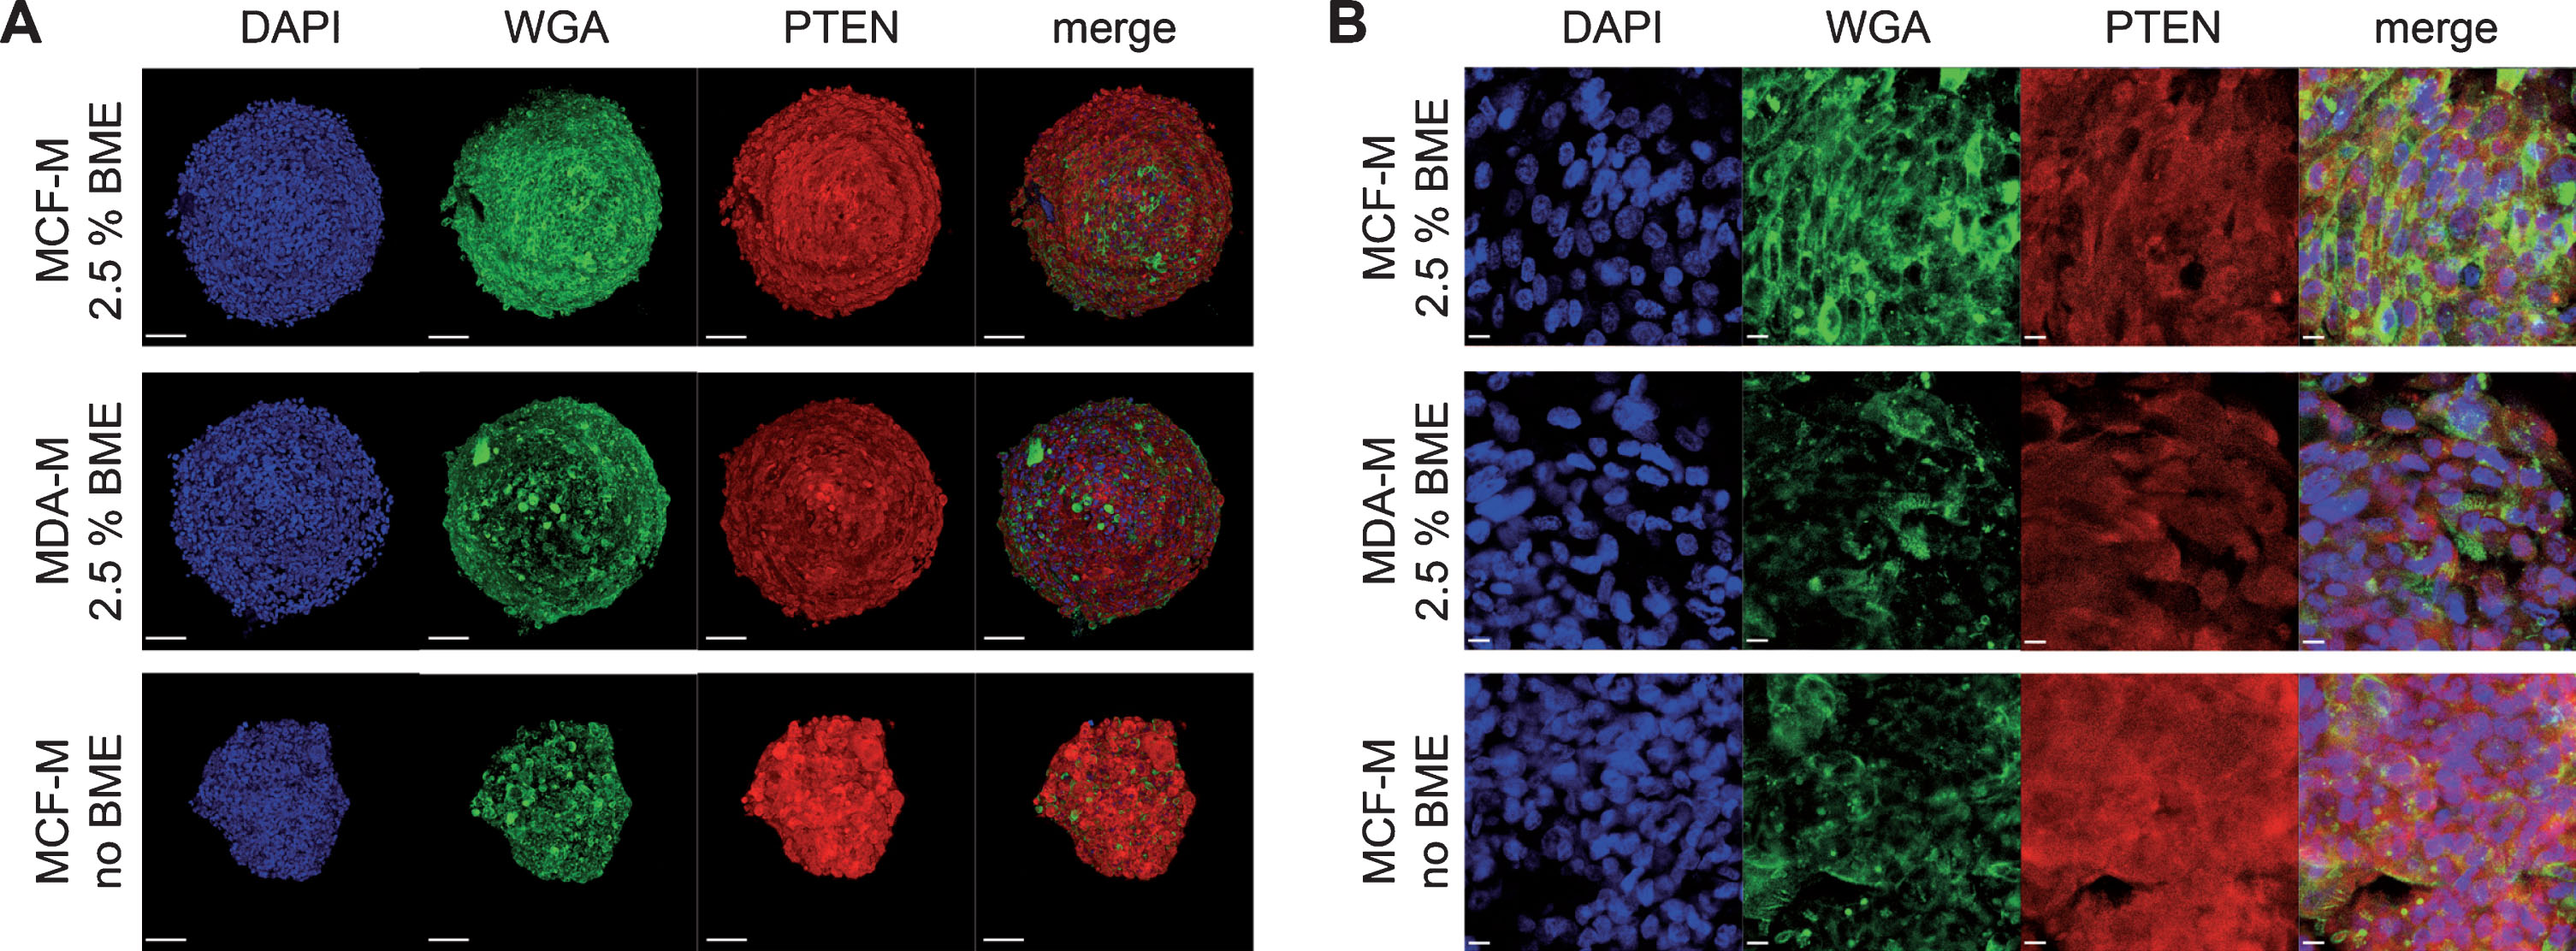 Addition of BME strongly alters PTEN expression level in MDA-MB-231 spheroids. MDA-MB-231 cells were cultured in ultra-low attachment plates for 9 DIV using either rich media designed for MCF10A cells (MCF-M) or poor media for MDA-MB-231 cells (MDA-M) and in the absence or presence of BME. Then, whole mount spheroid staining was done using DAPI, WGA, and anti-PTEN antibodies to label nuclei (blue), cell membranes (green), and PTEN protein (red). Spheroids were then imaged using confocal microscopy. Panels depict maximum-z projections (A) or single optical slices (B) from samples as indicated.